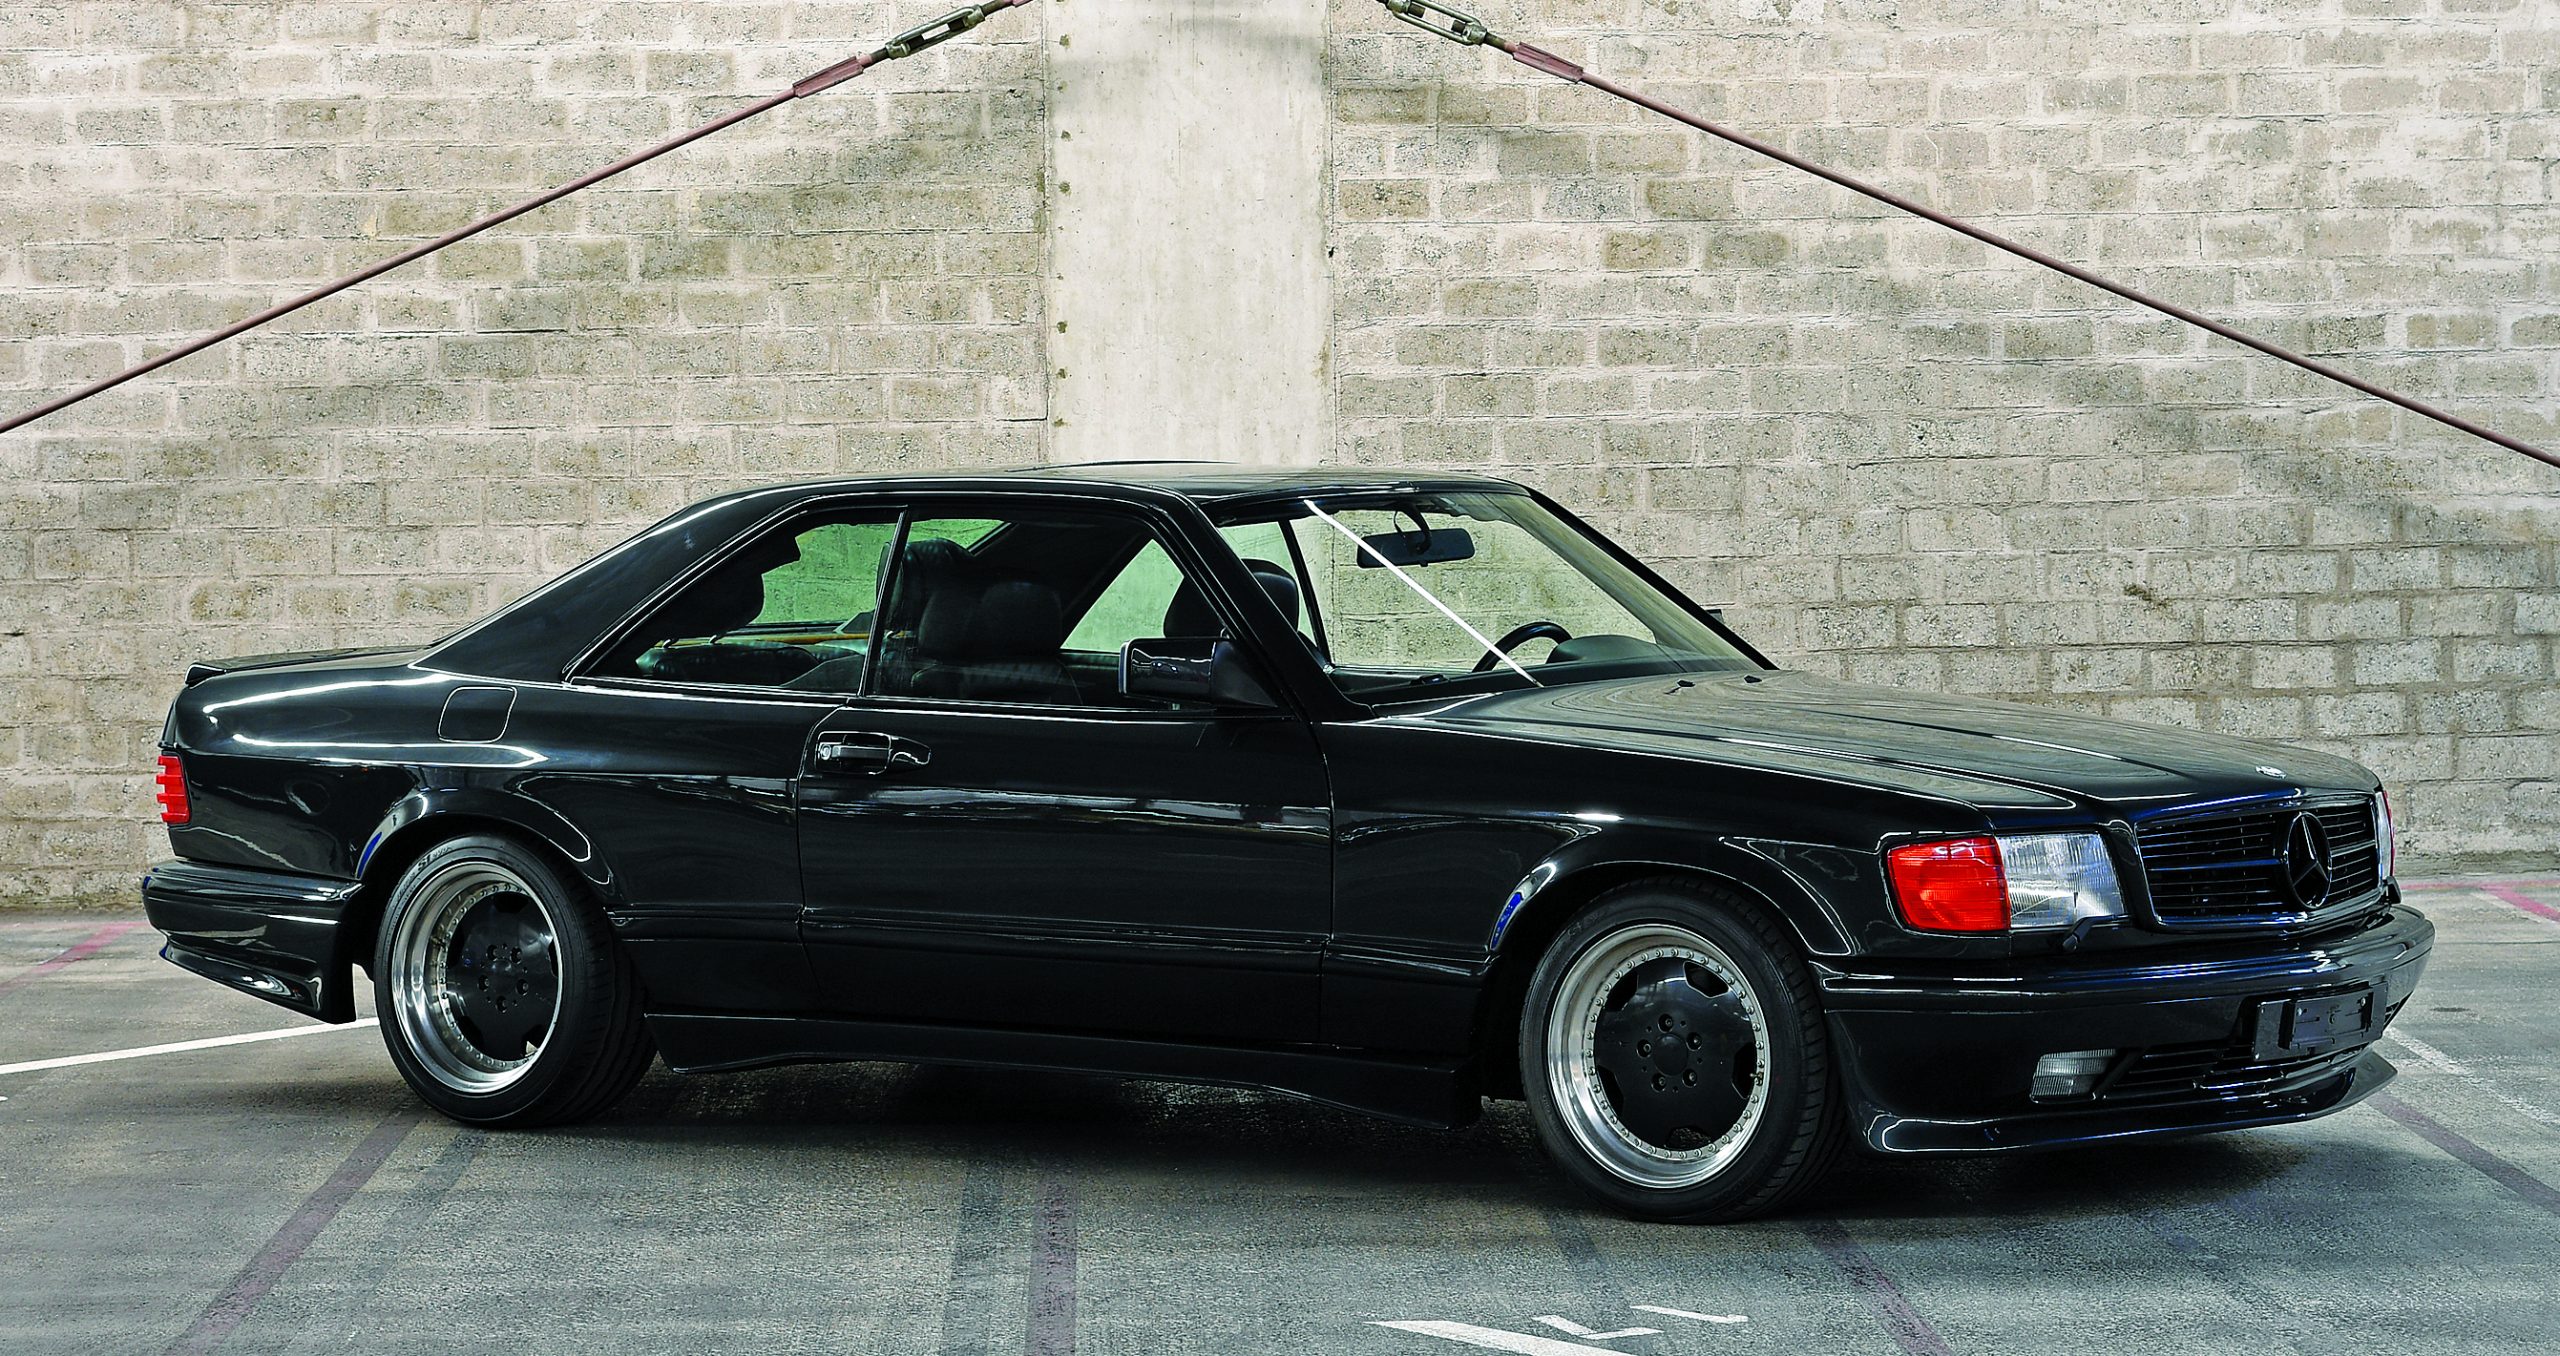 1989-mercedes-benz-560sec-amg-6-0-wide-body-front-2-scaled.jpg